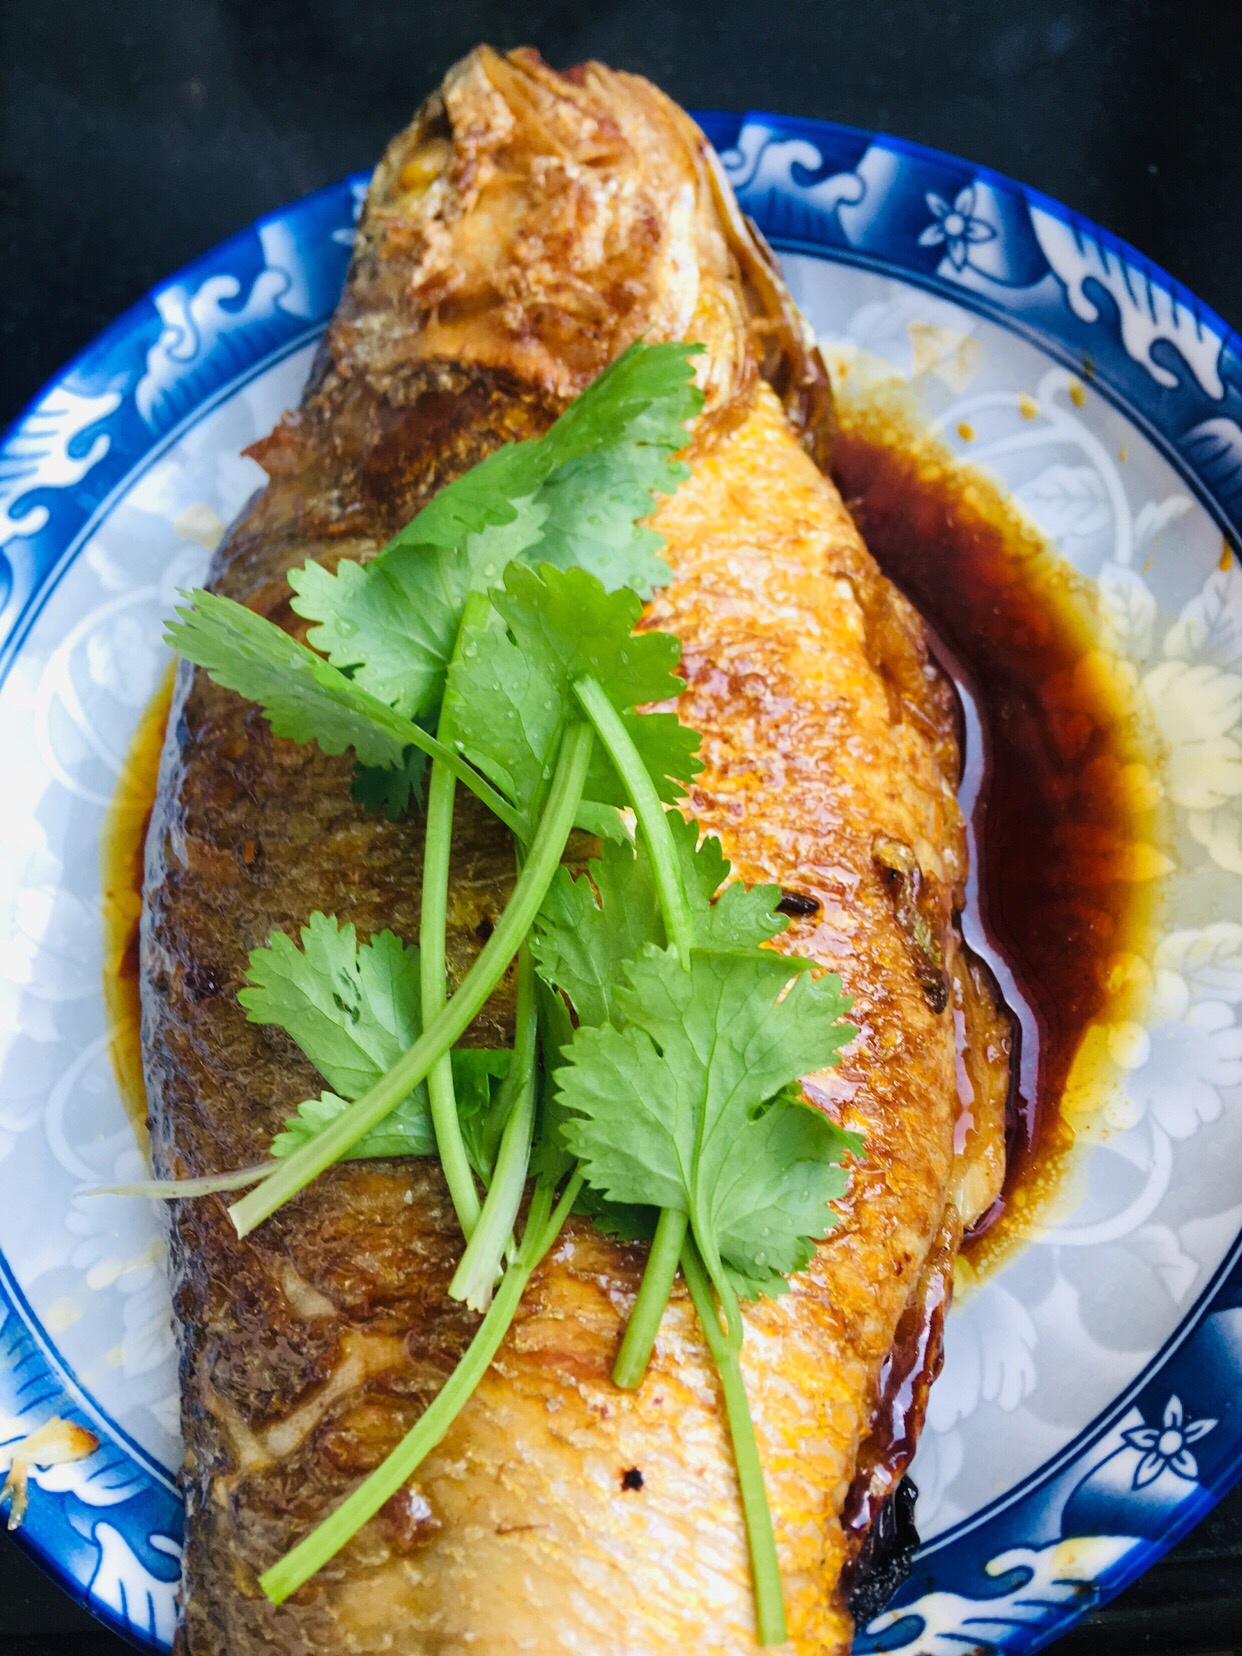 
Yellow croaker of braise in soy sauce plays simple way extremely